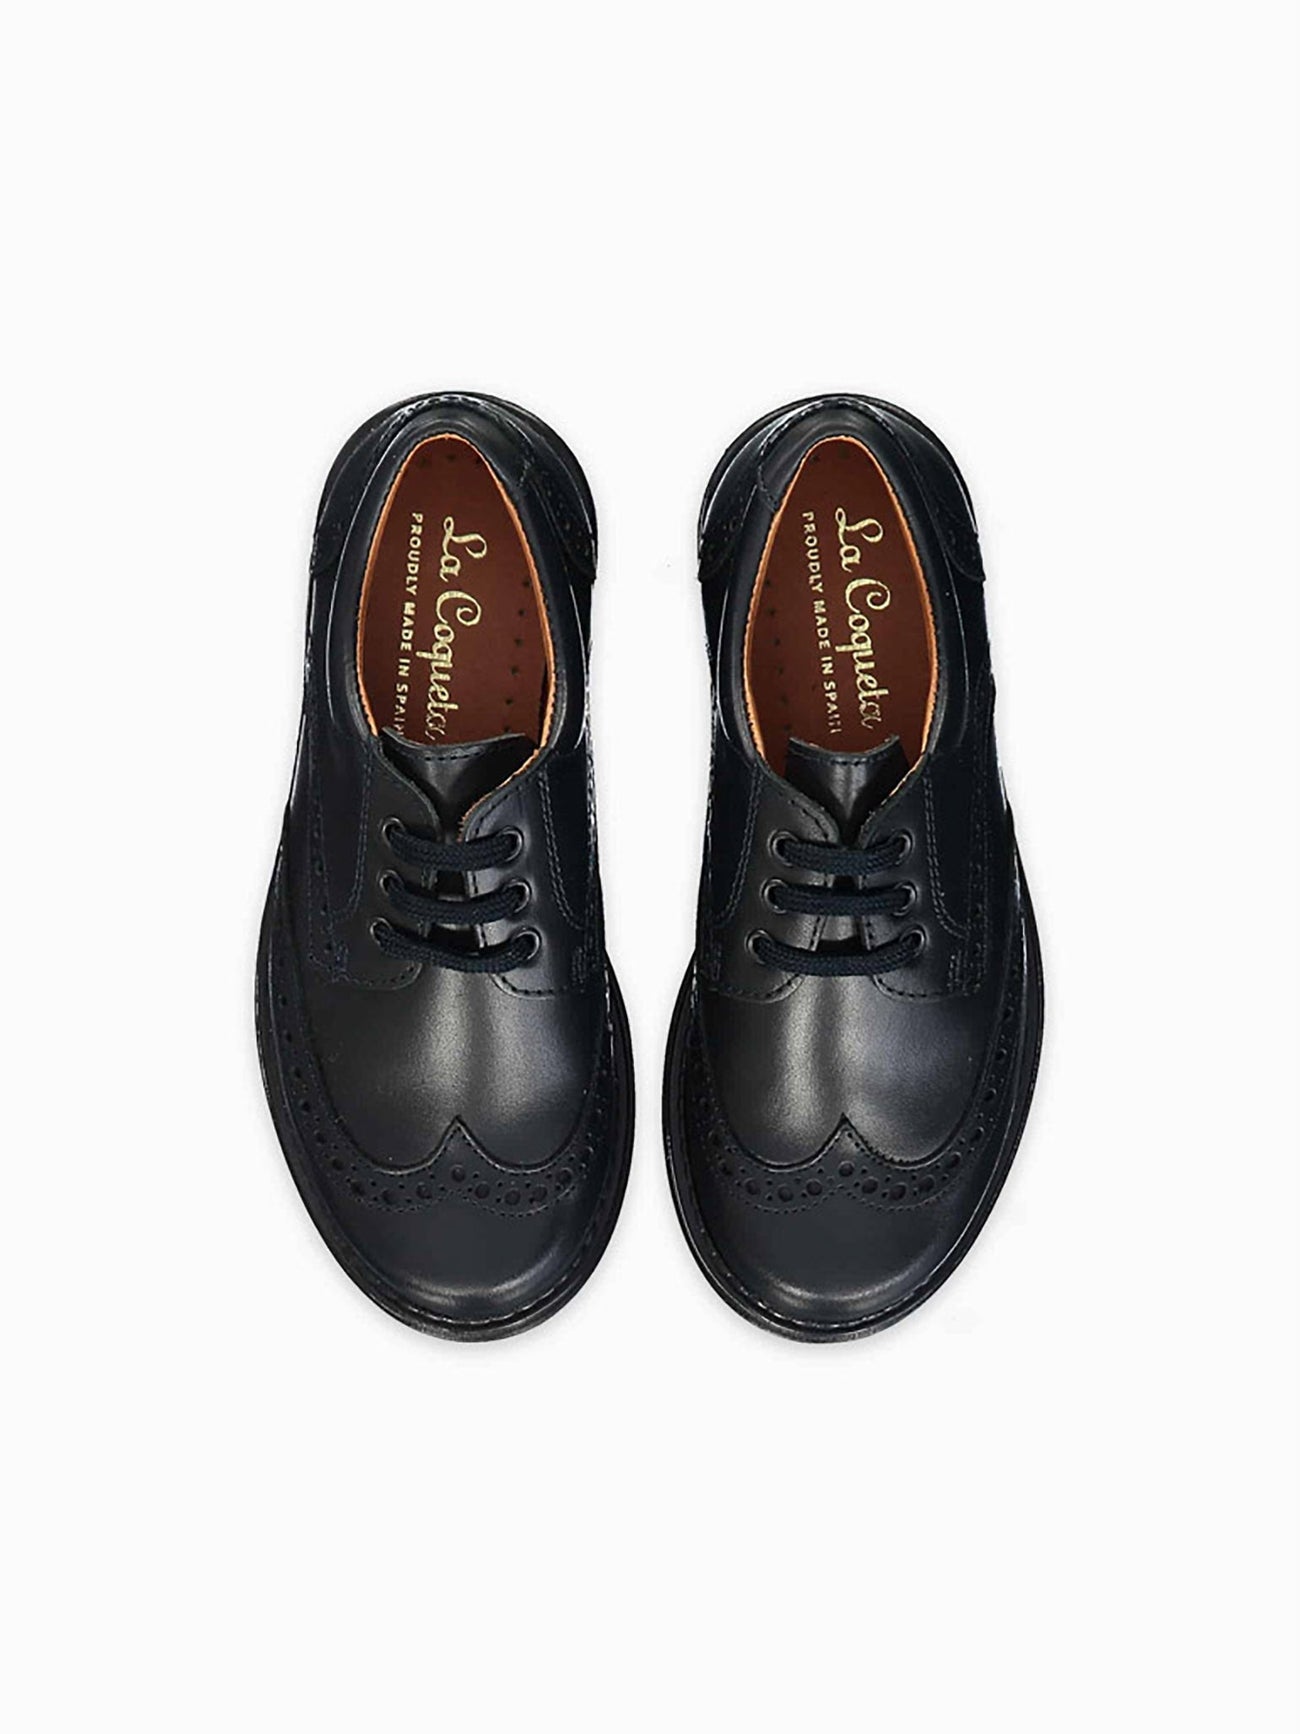 Girls School Shoes, Black & Leather